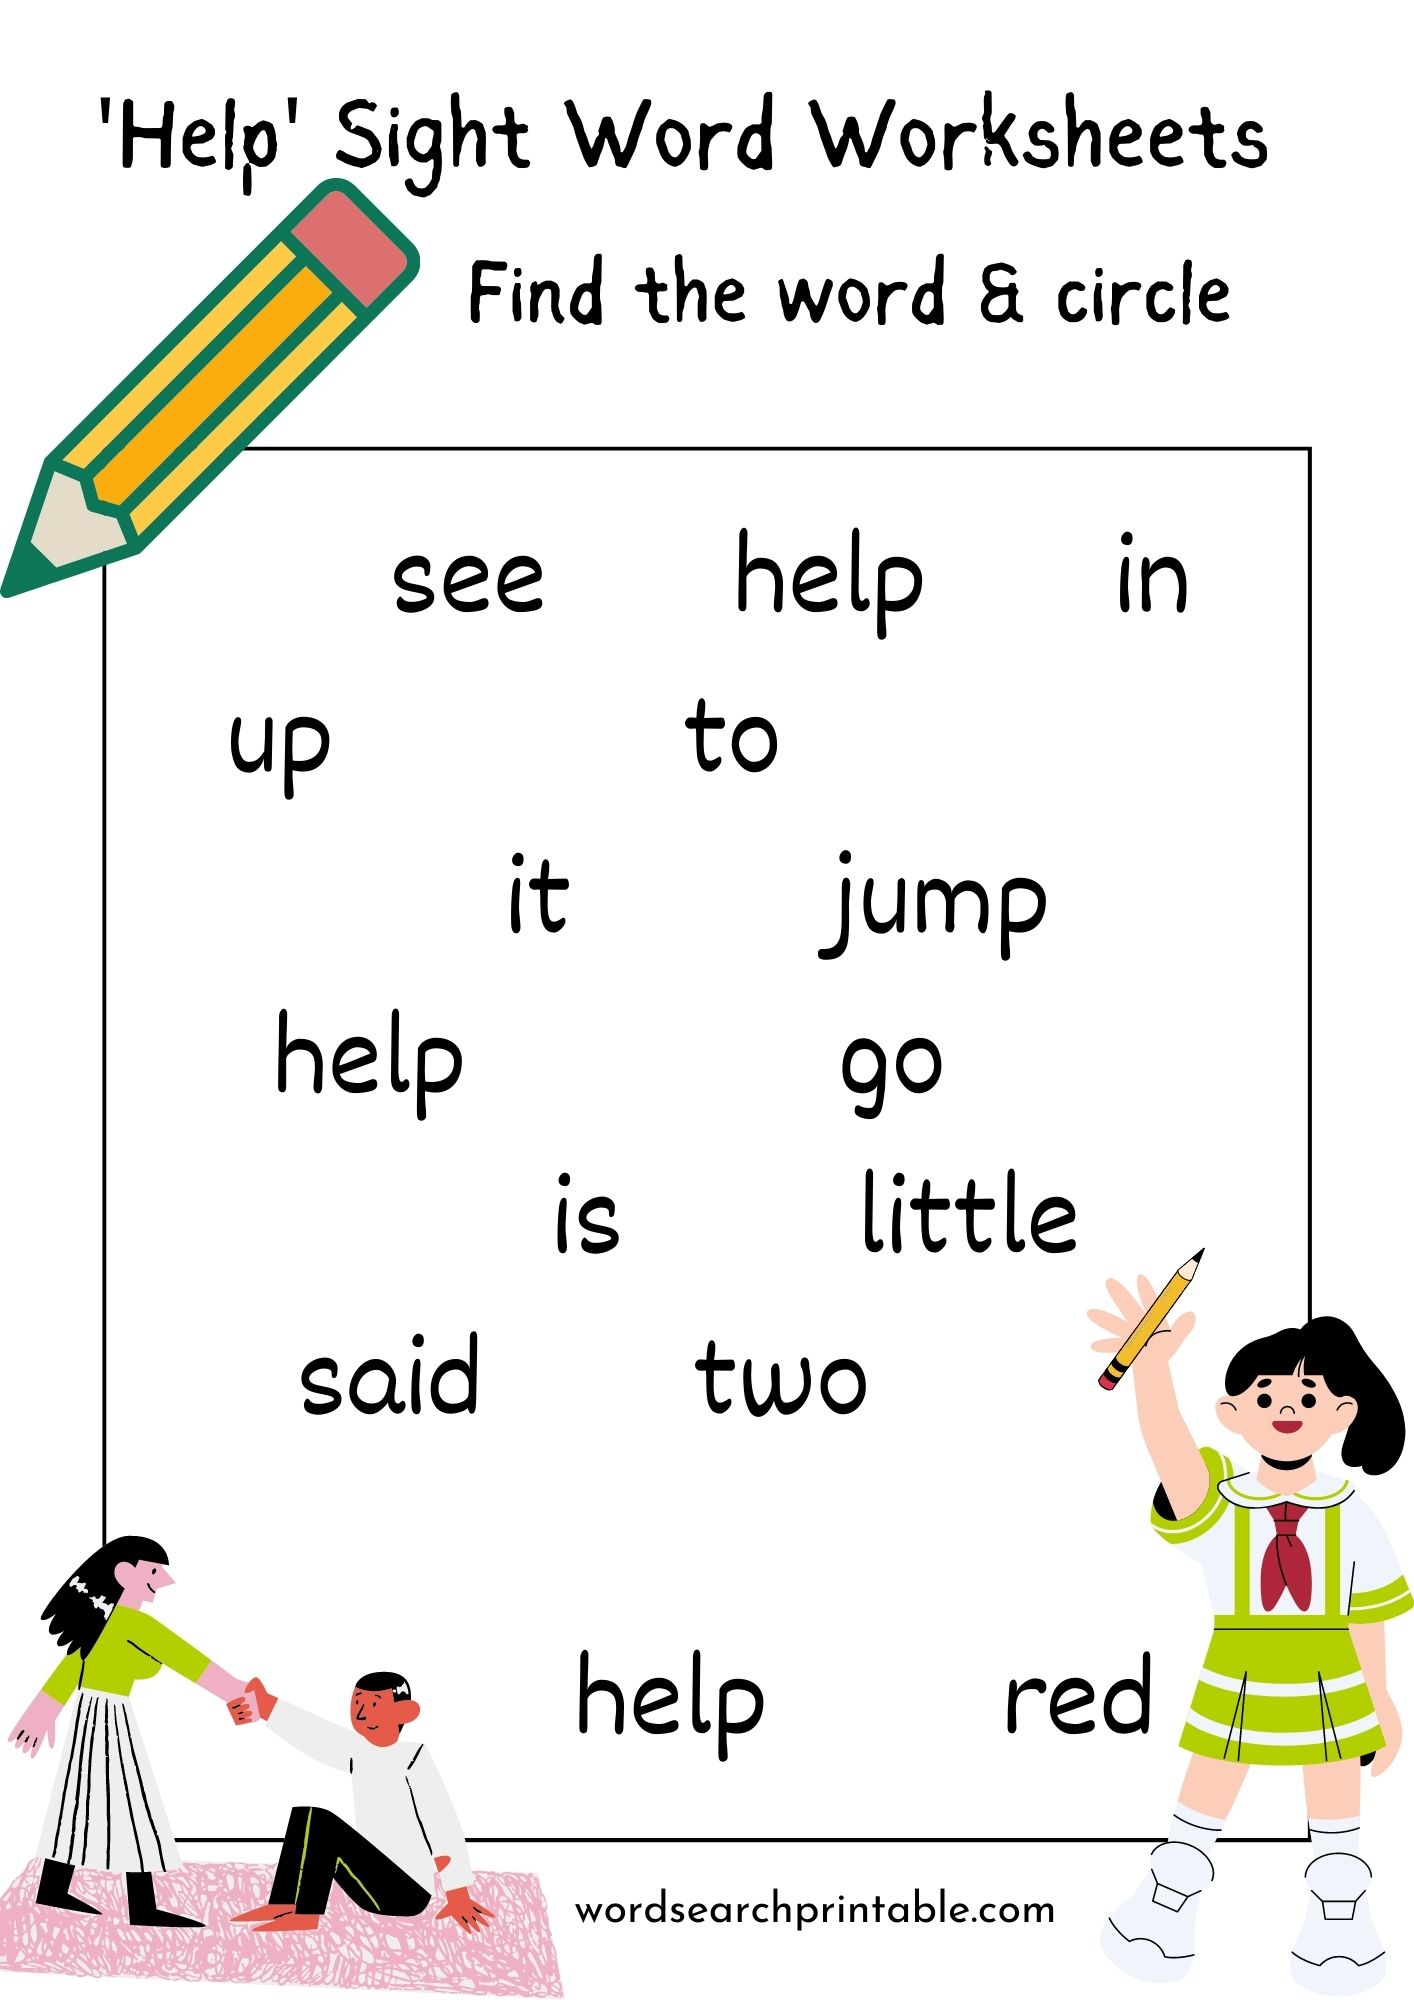 Find the sight word Help and circle it